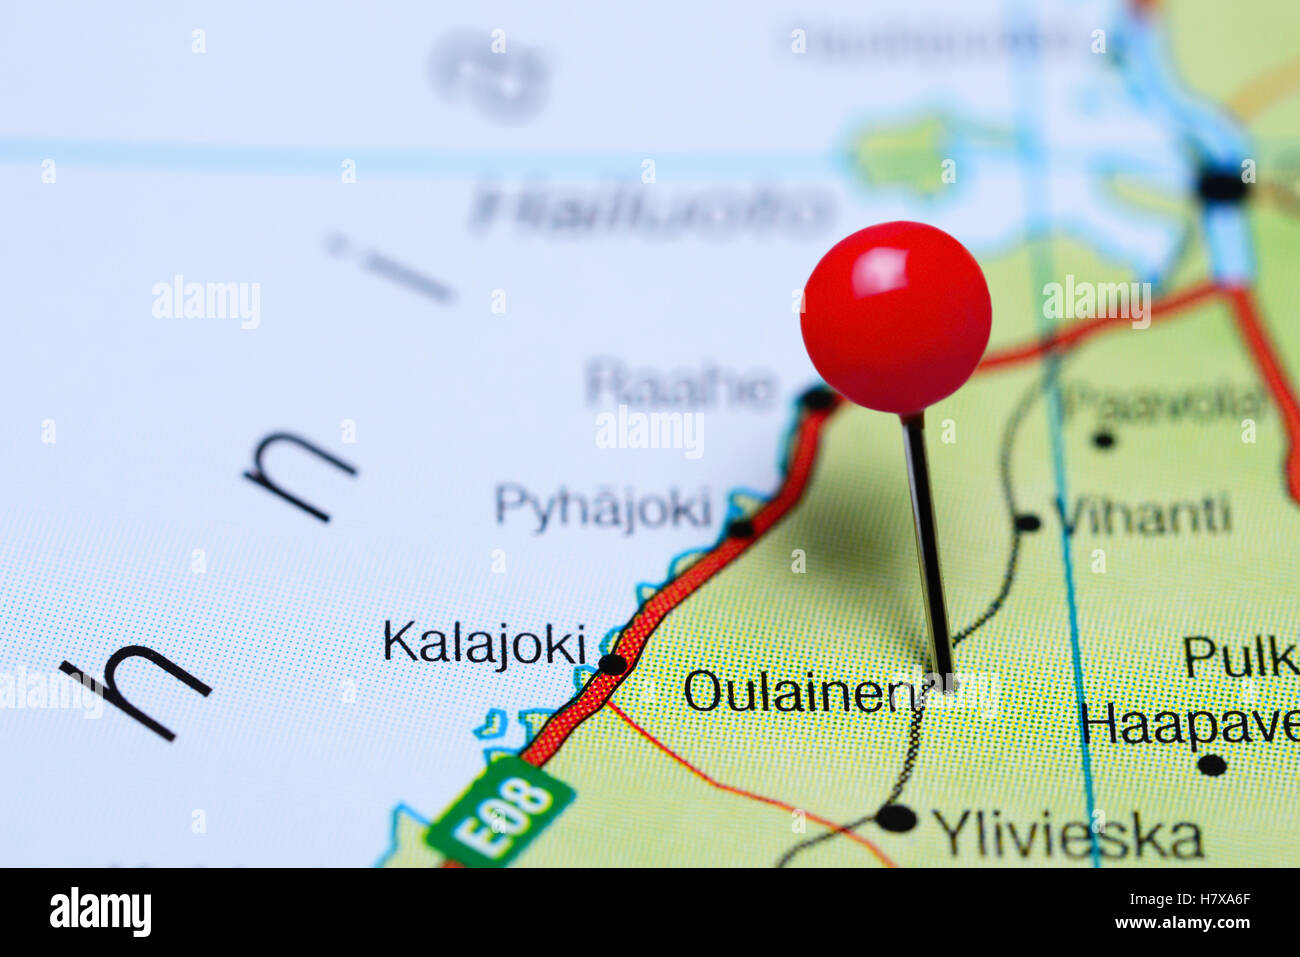 Oulainen pinned on a map of Finland Stock Photo